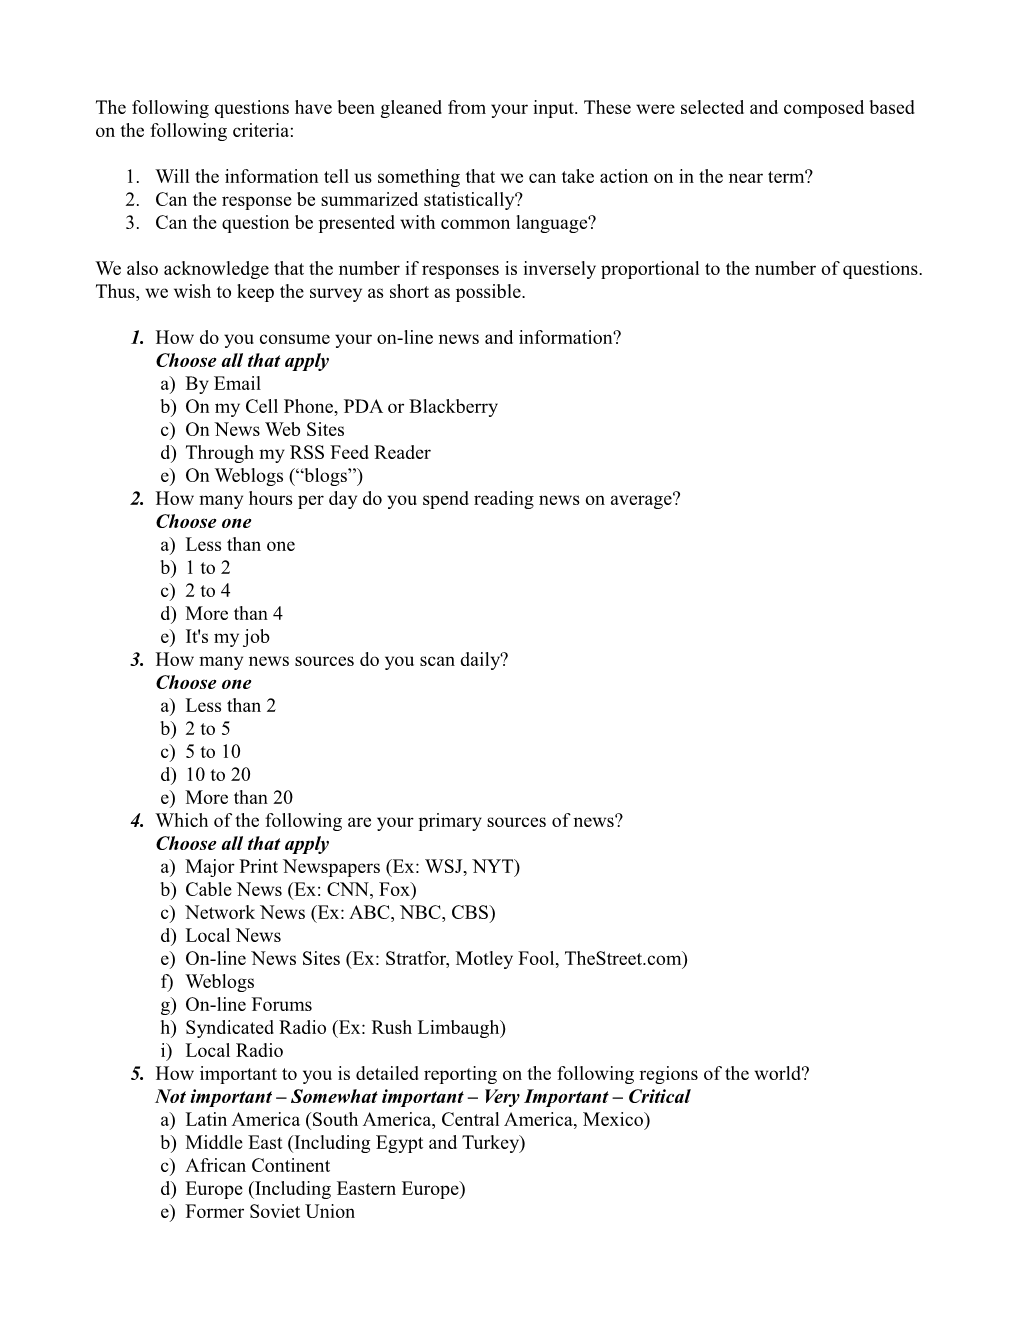 The Following Questions Have Been Gleaned from Your Input. These Were Selected and Composed